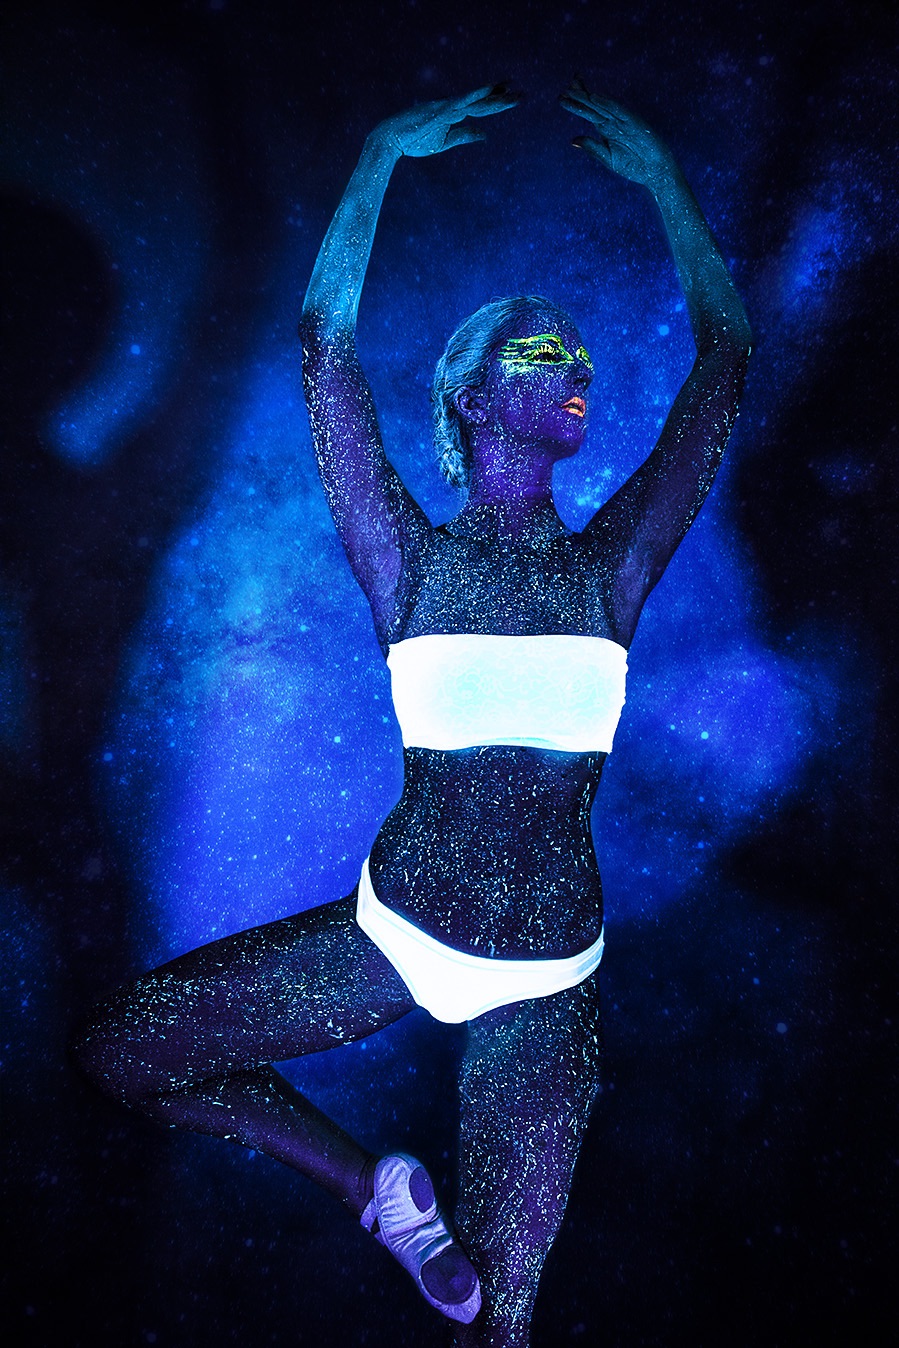 Dancing in the UniVerse...